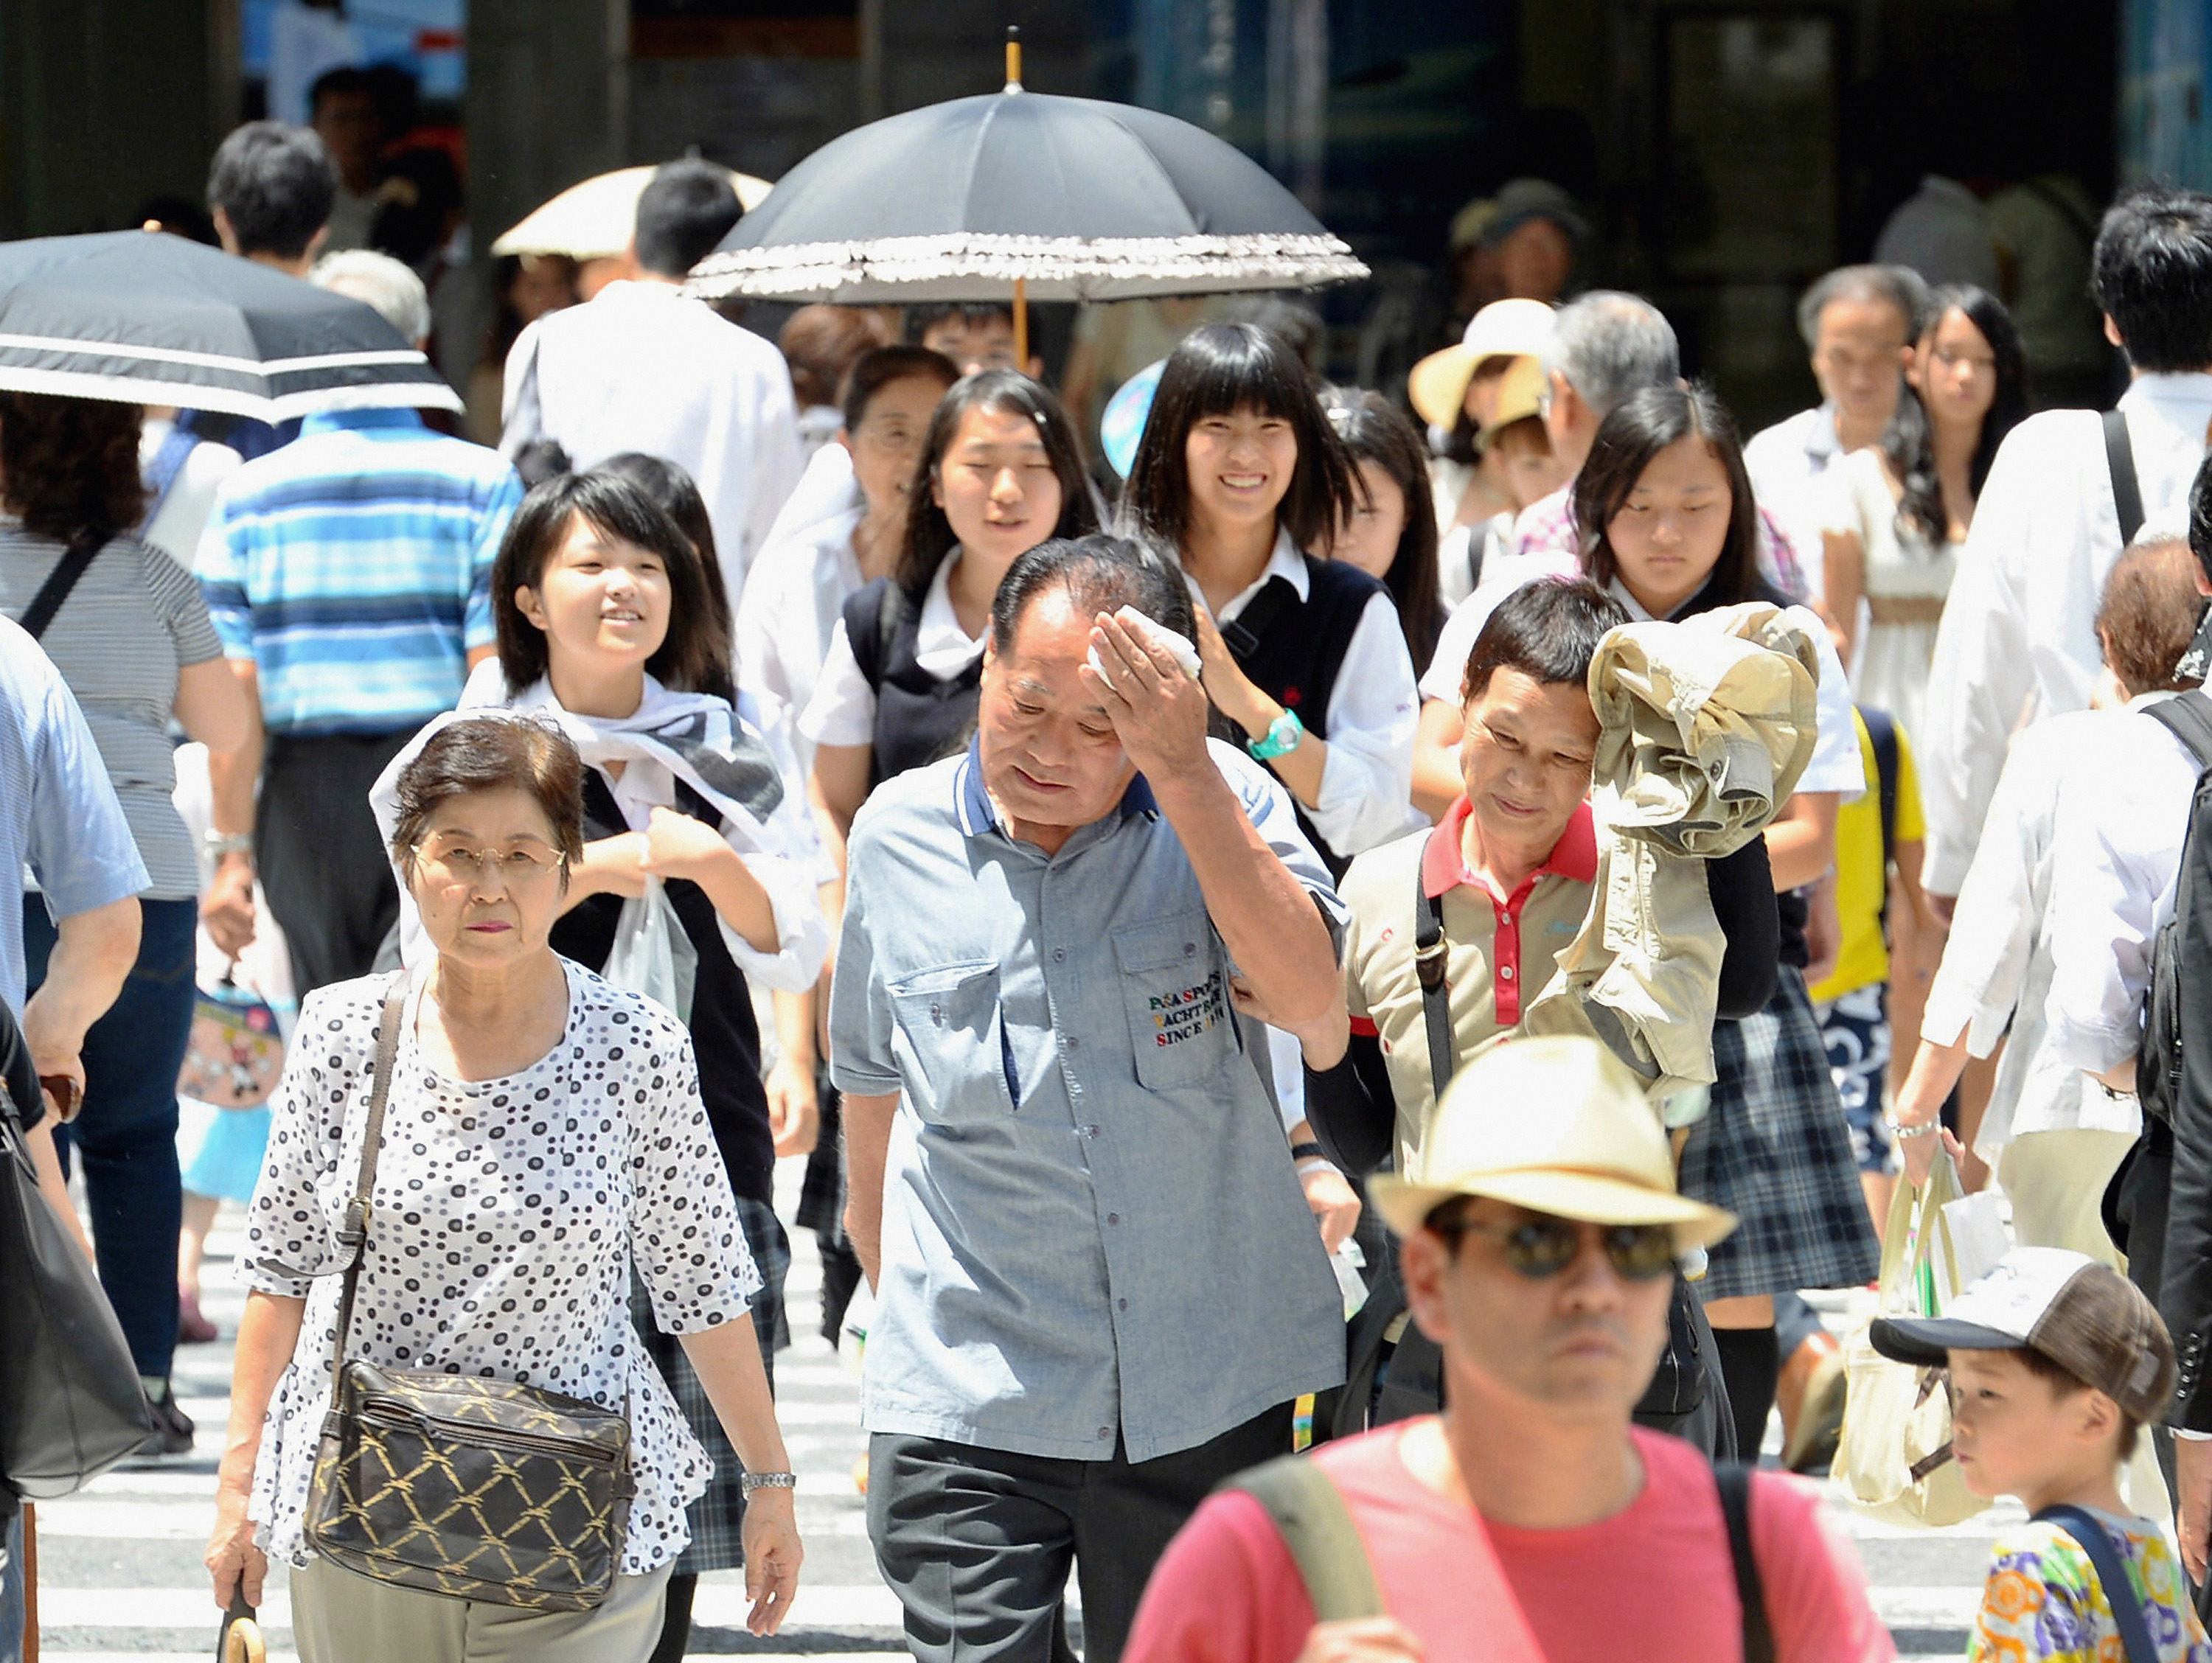 Japanese Heat Wave Leaves 15 Dead, Thousands Hospitalized | Time